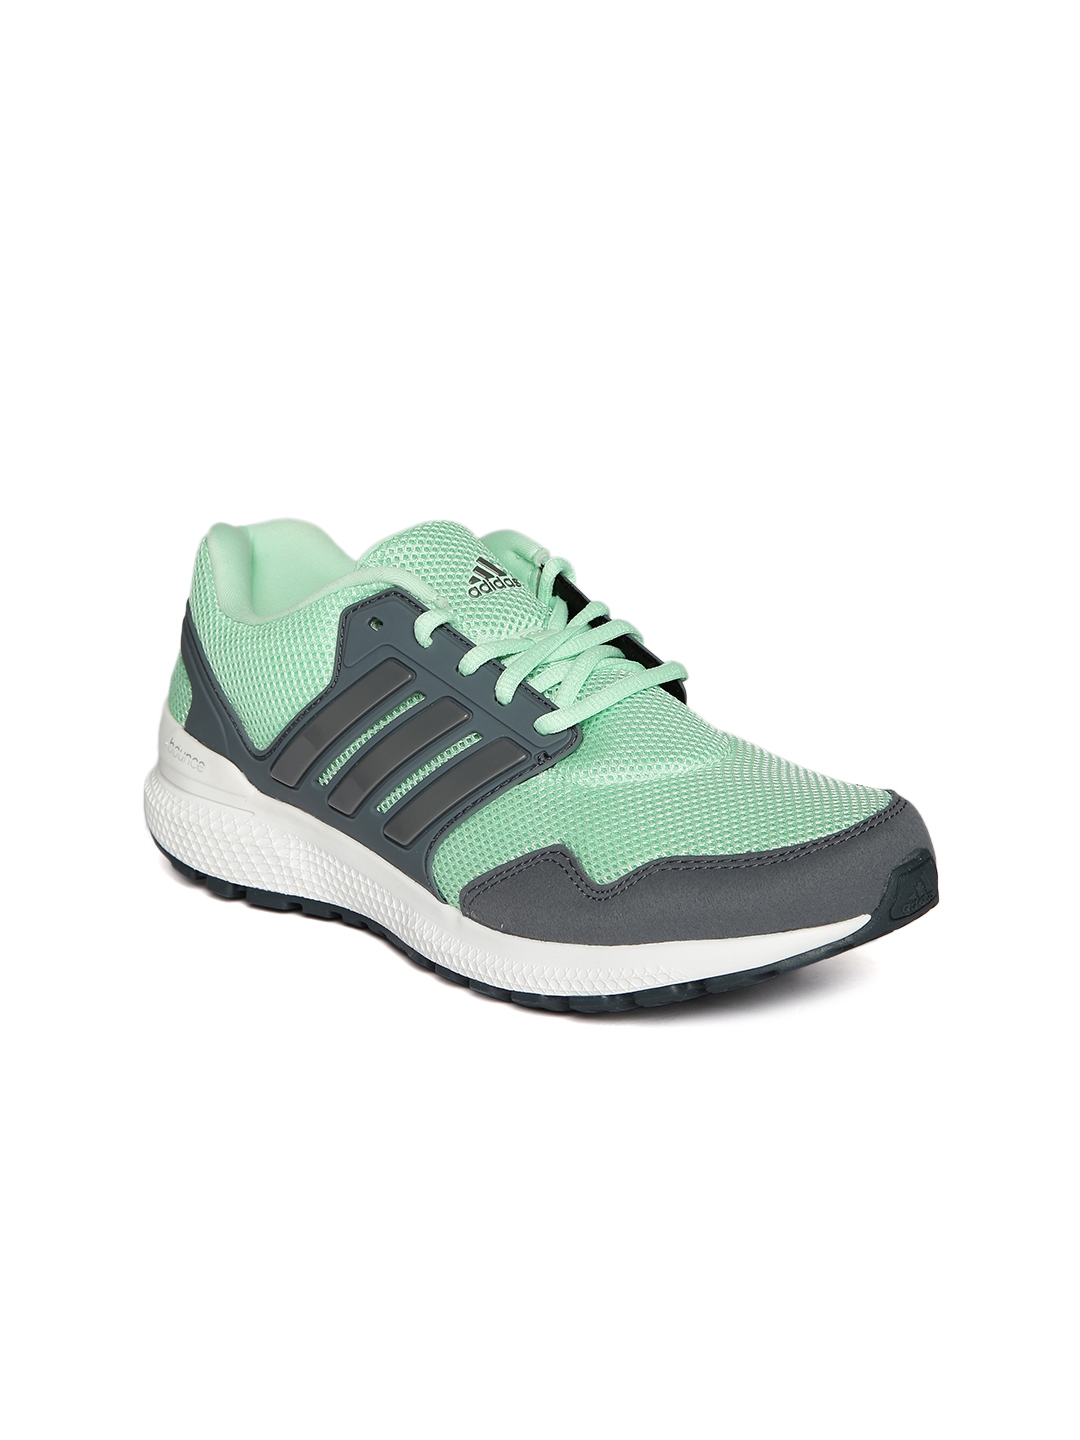 11450427920376 Adidas Women Mint Green Ozweego Bounce Stability Running Shoes  6221450427919746 1 